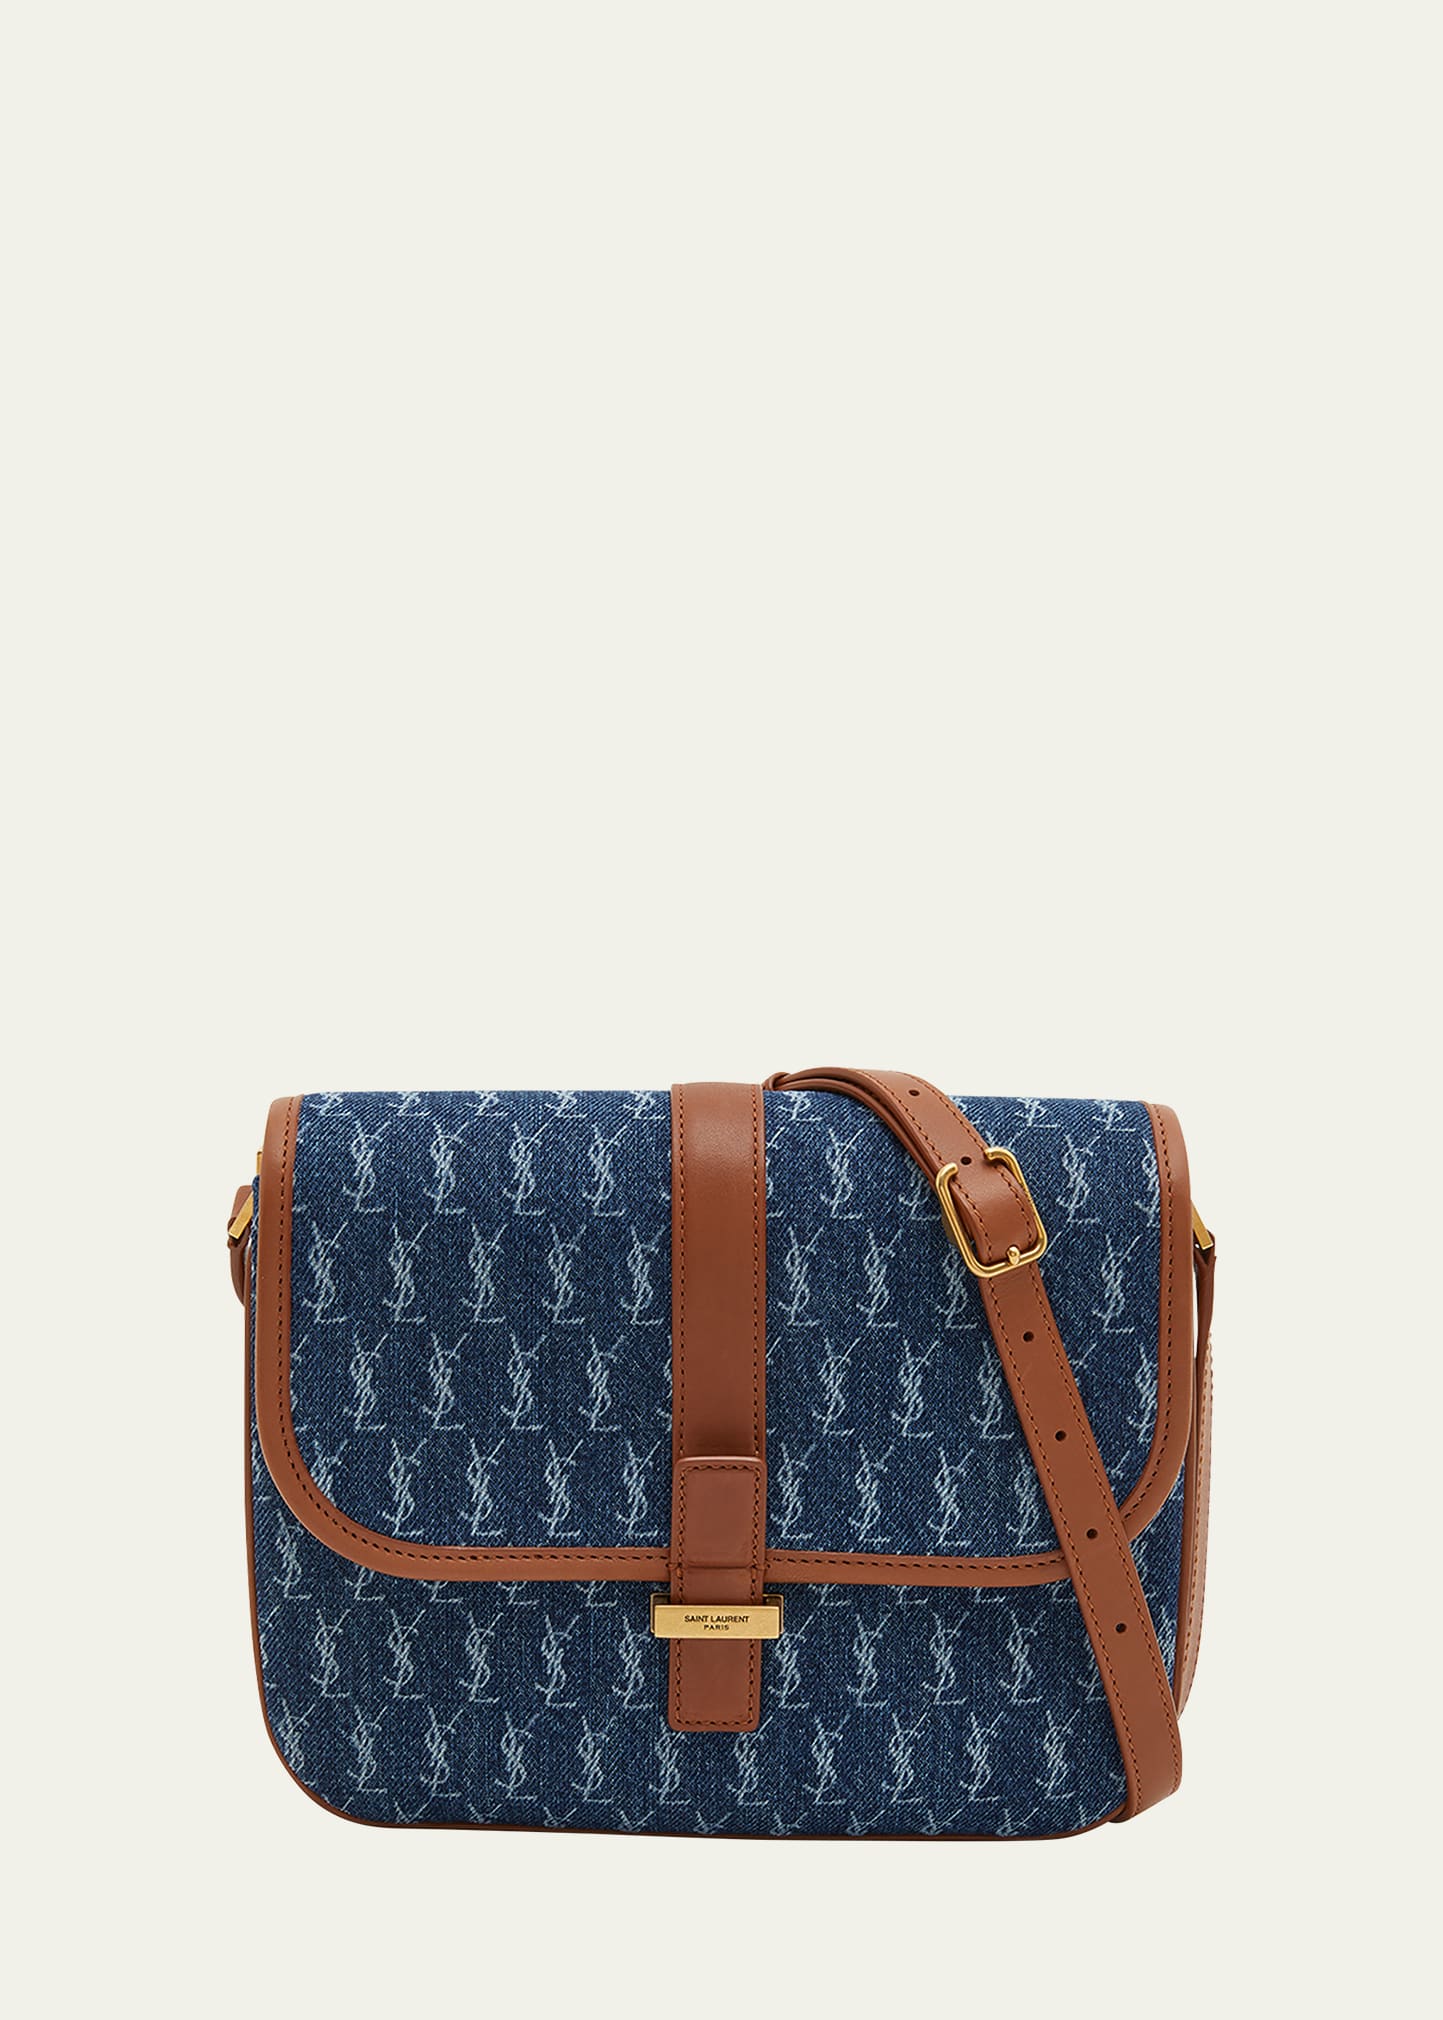 Louis Vuitton e Sling Bag One Size Brown Canvas for sale online